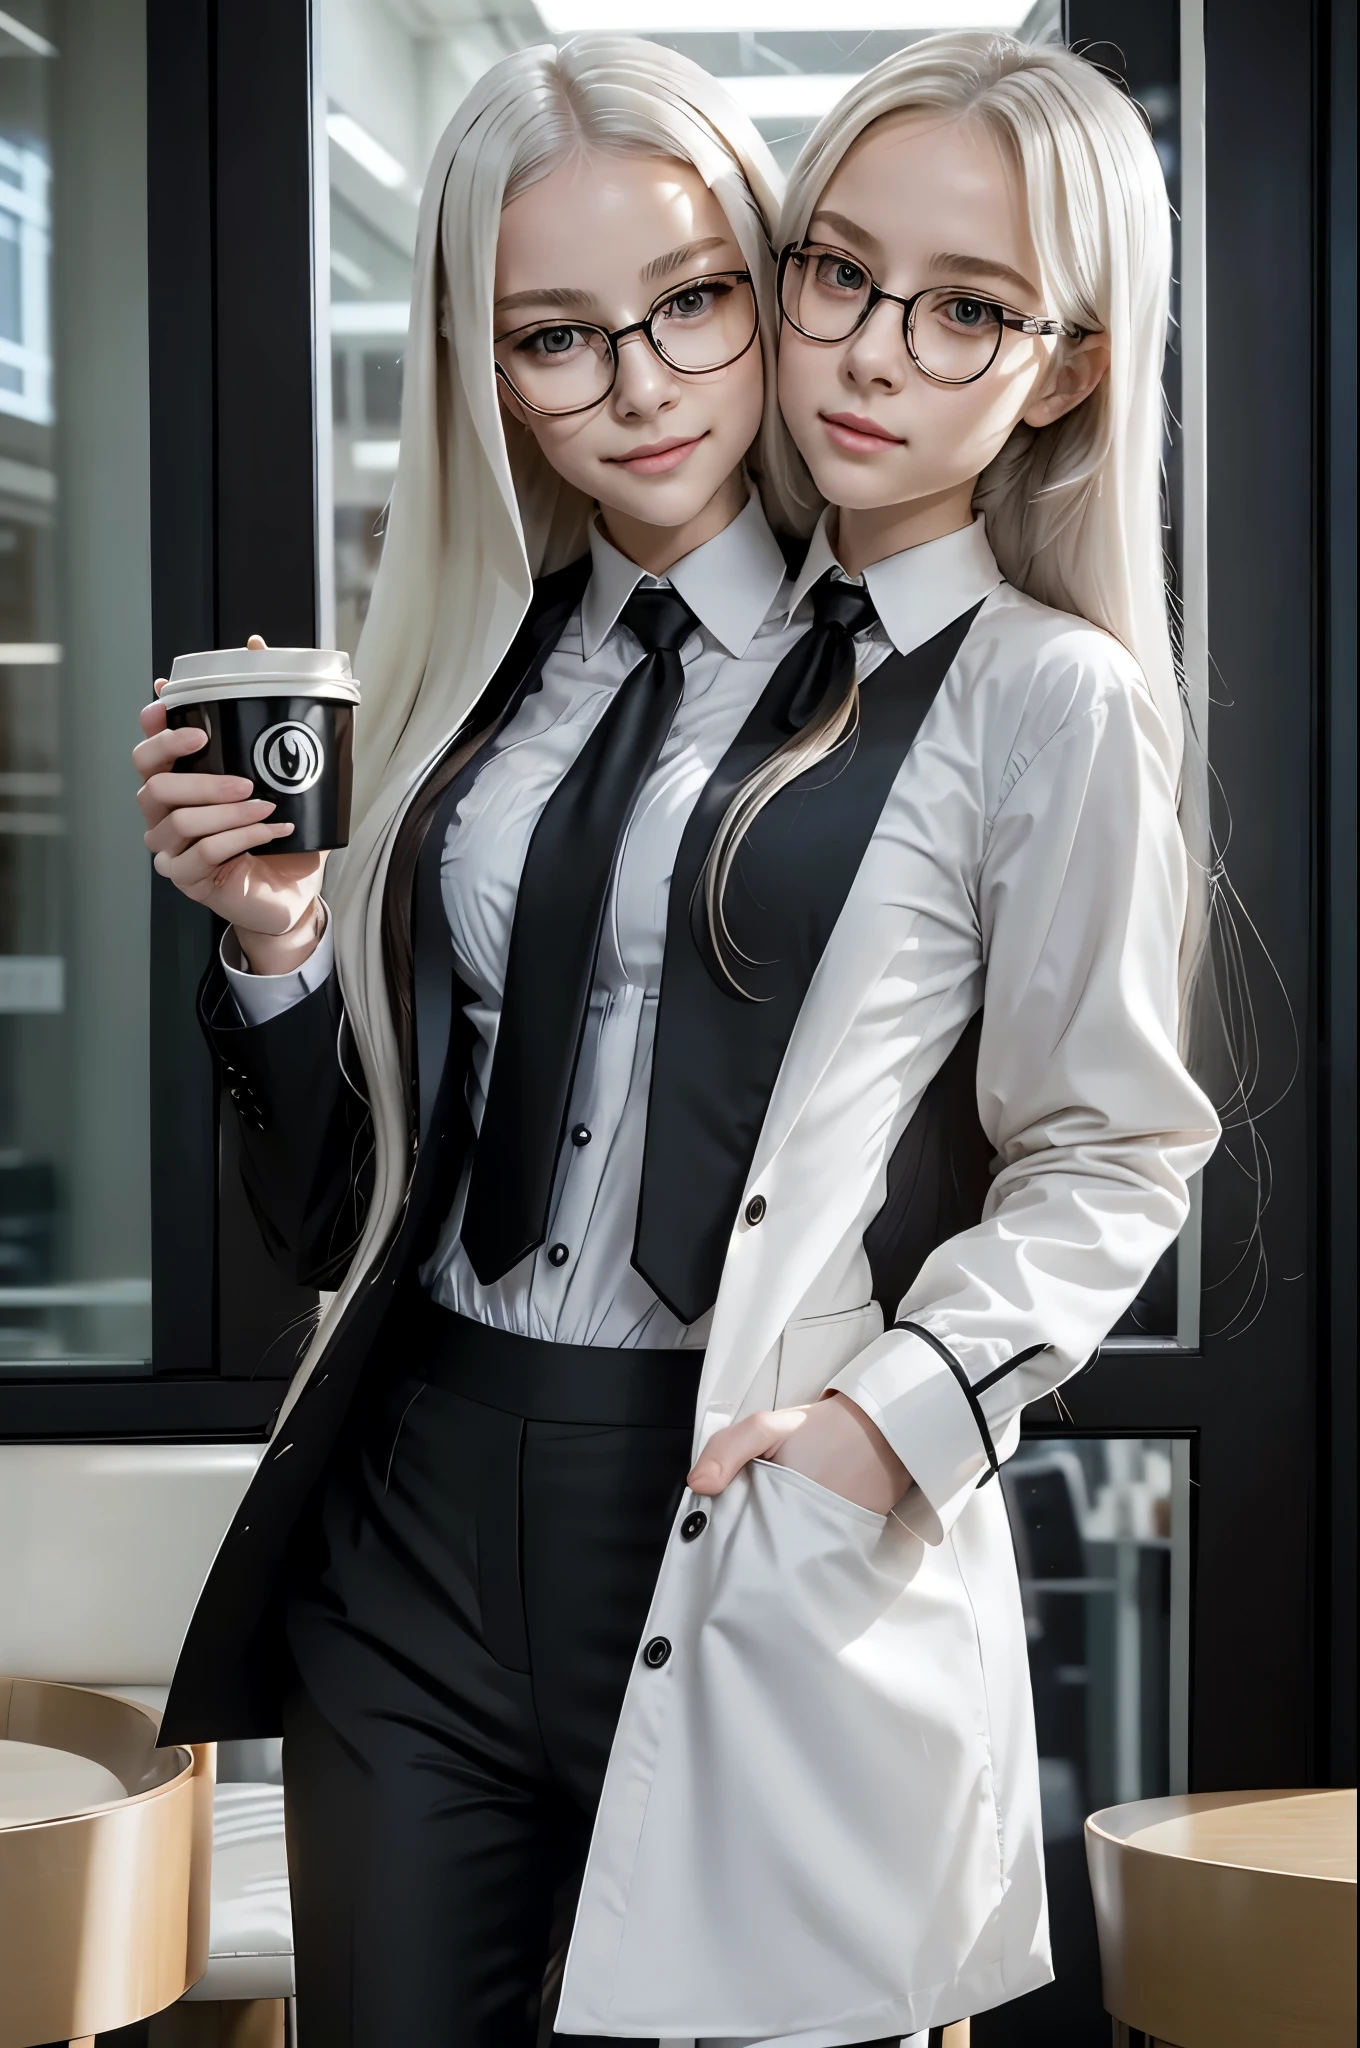 2heads, 1girl, glasses, very long white hair,  body, short, black necktie, jacket, trouser, collared shirt, Black pantsuit, white shirt, holding a coffee, masterpiece, high quality, absurdres, office, beautiful background, holding cup of coffee, looking at each other, kissing, kiss, french kiss, lips touching